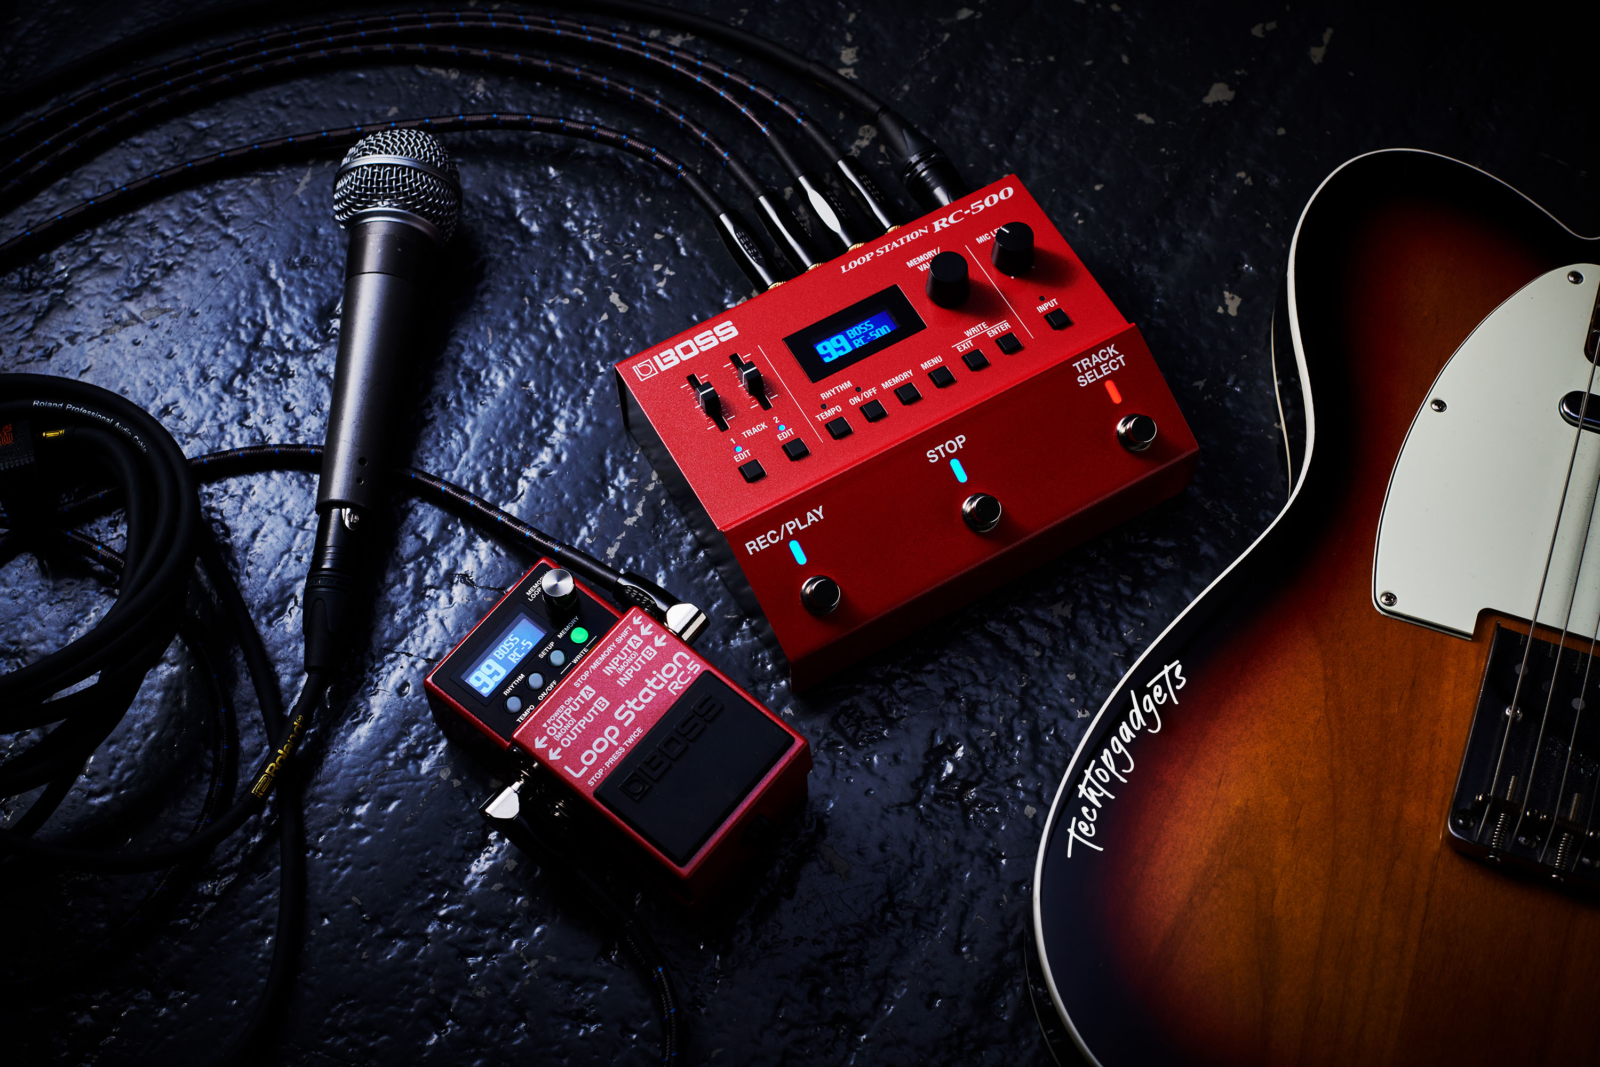 A setup view of the Boss RC-500 best looping pedal alongside a guitar and microphone, illustrating how it integrates into a musician's live or studio setup.